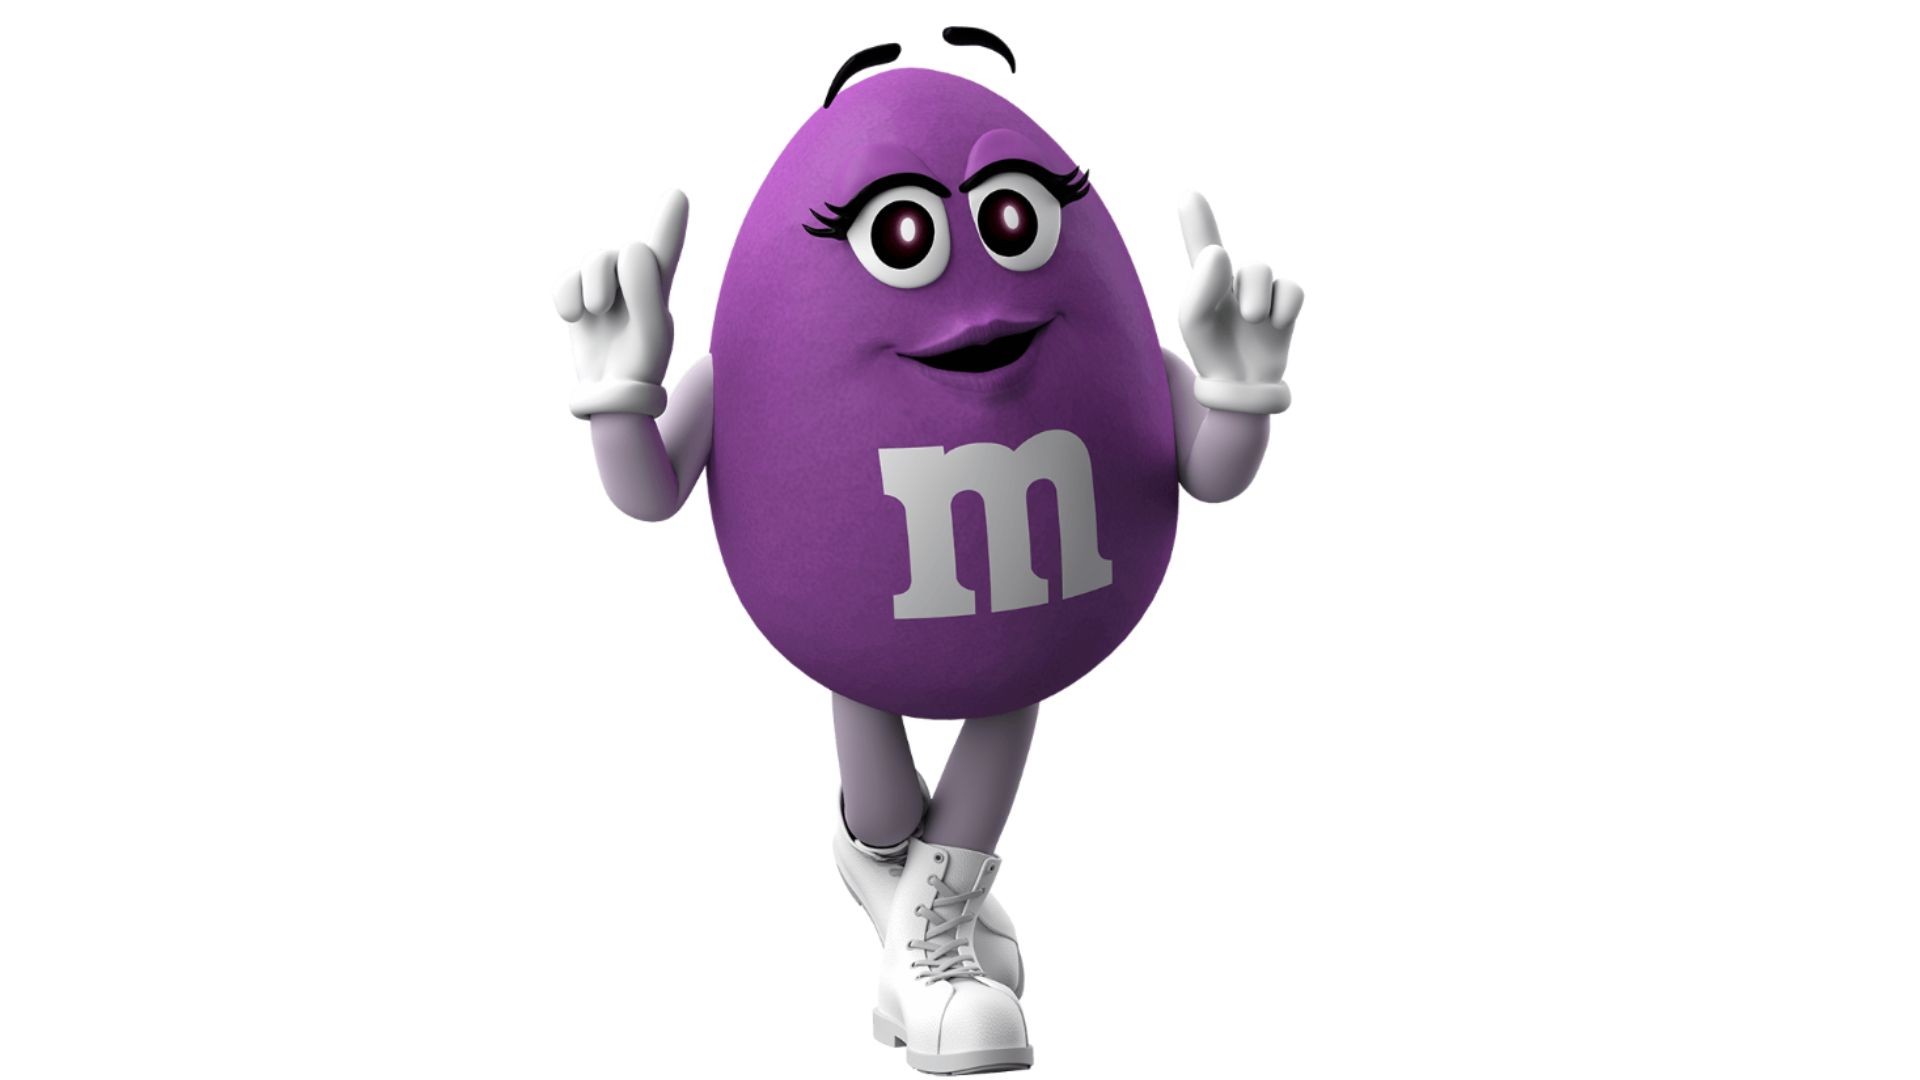 If You Don't Think the New M&Ms Are Sexy Enough, Here Are Some NSFW Links